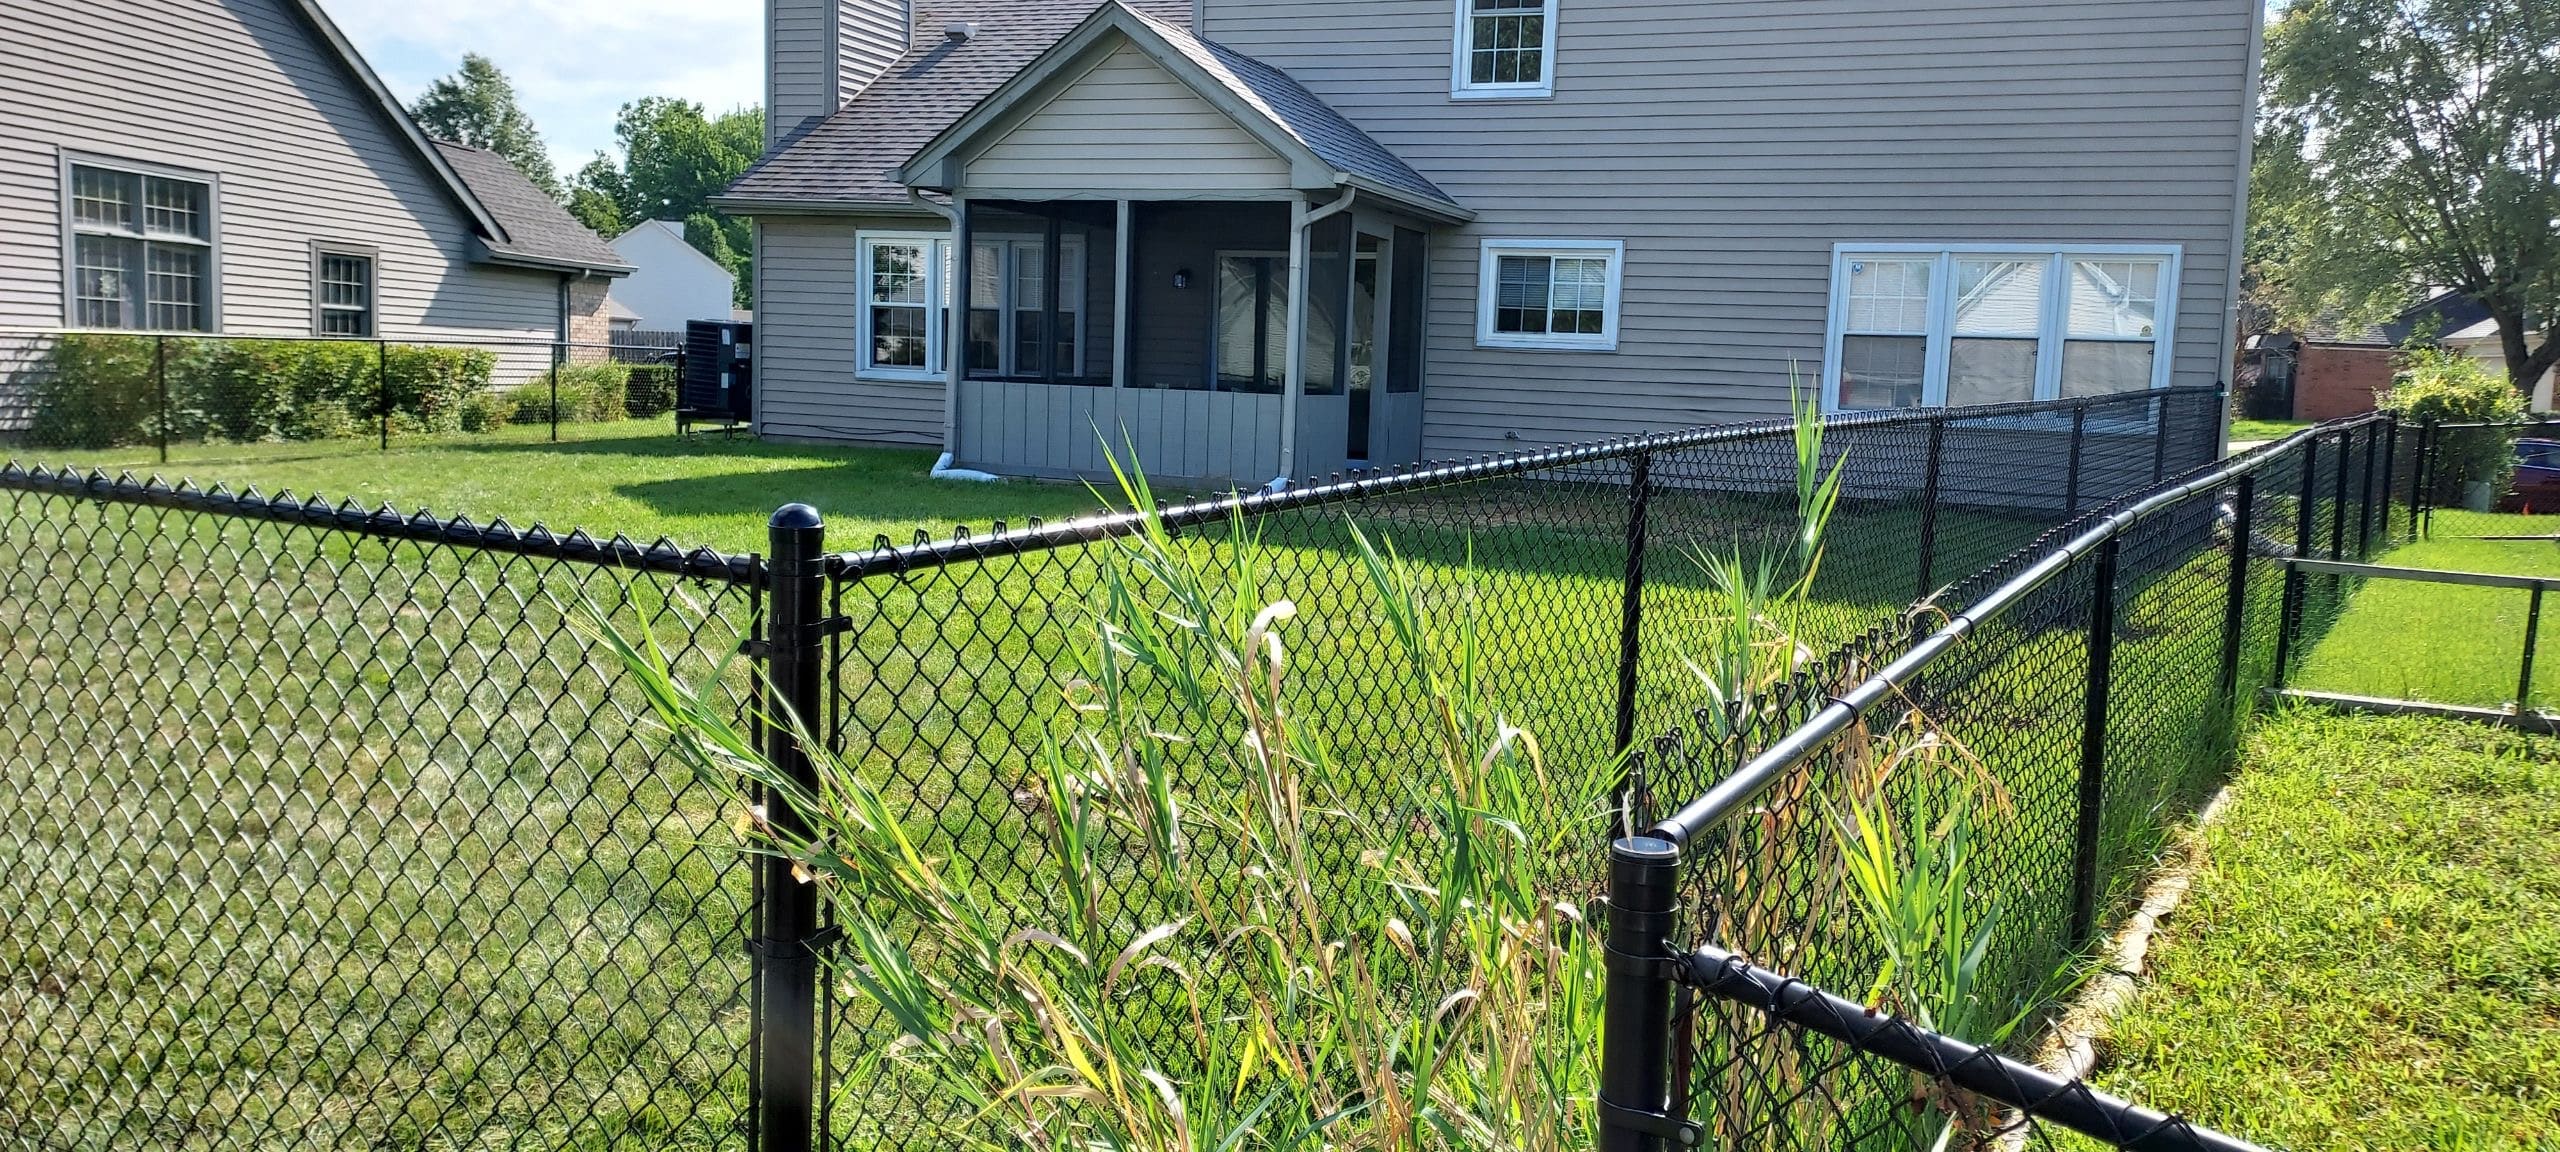 Fence Property Installation Services in Indianapolis